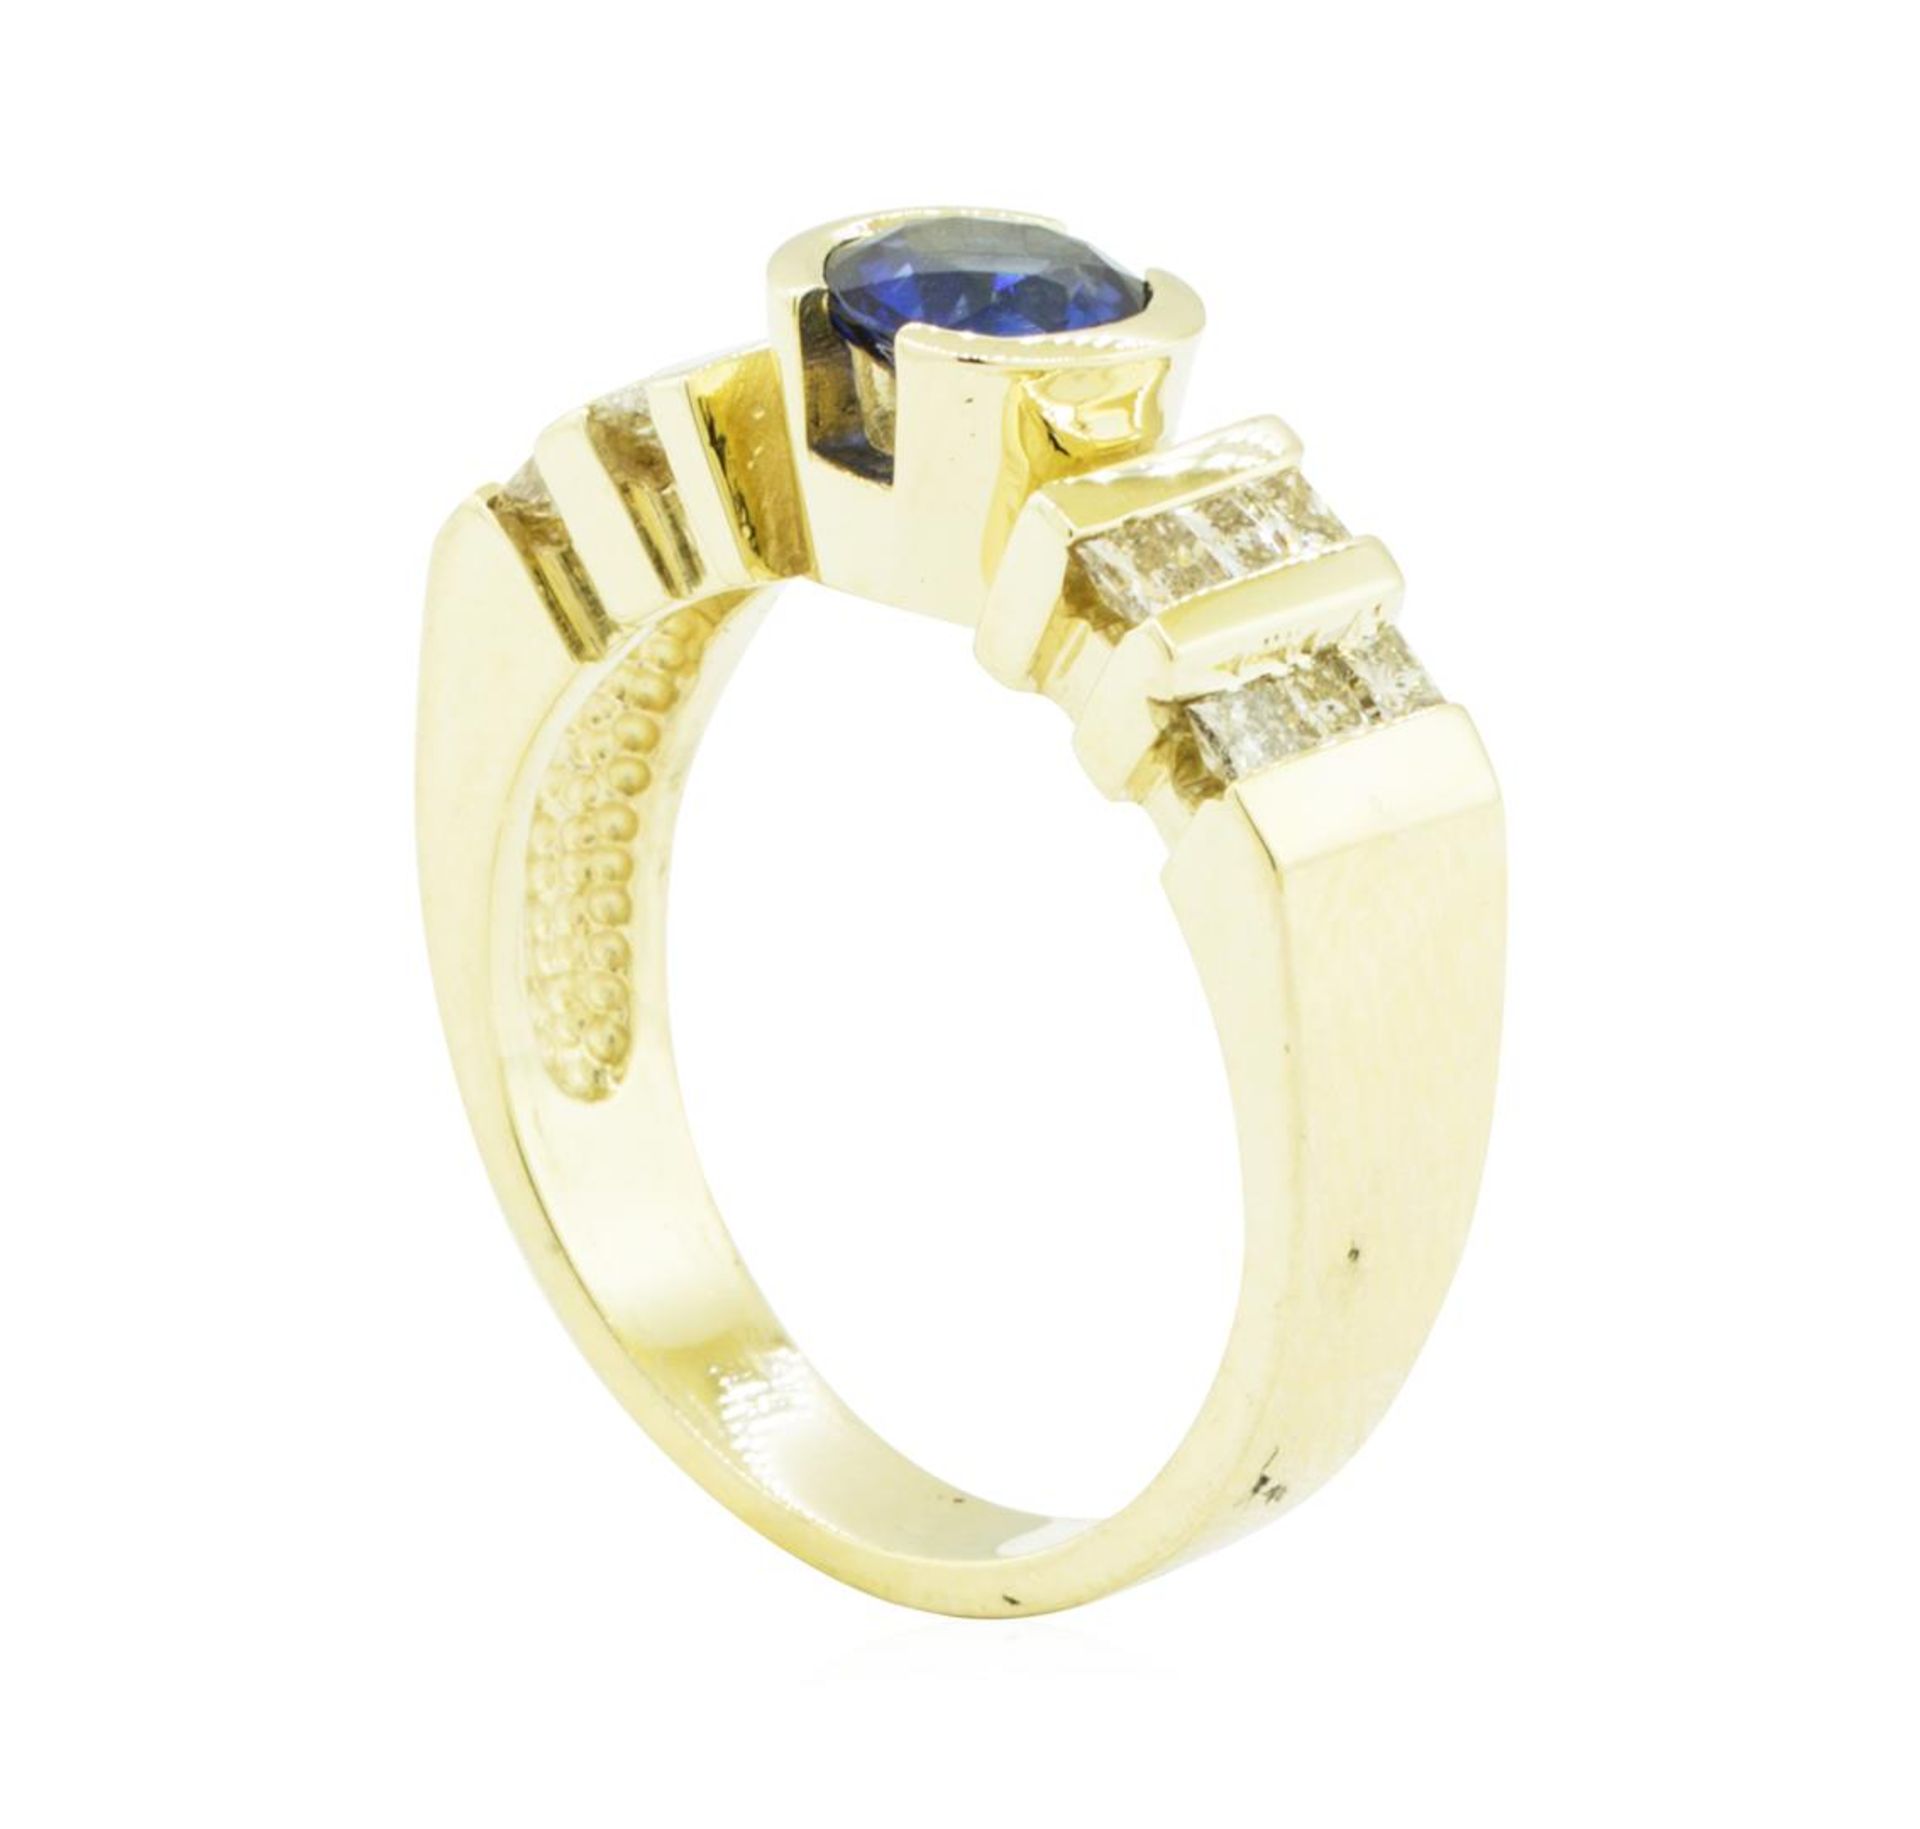 1.45 ctw Blue Sapphire and Diamond Ring - 14KT Yellow Gold - Image 4 of 4